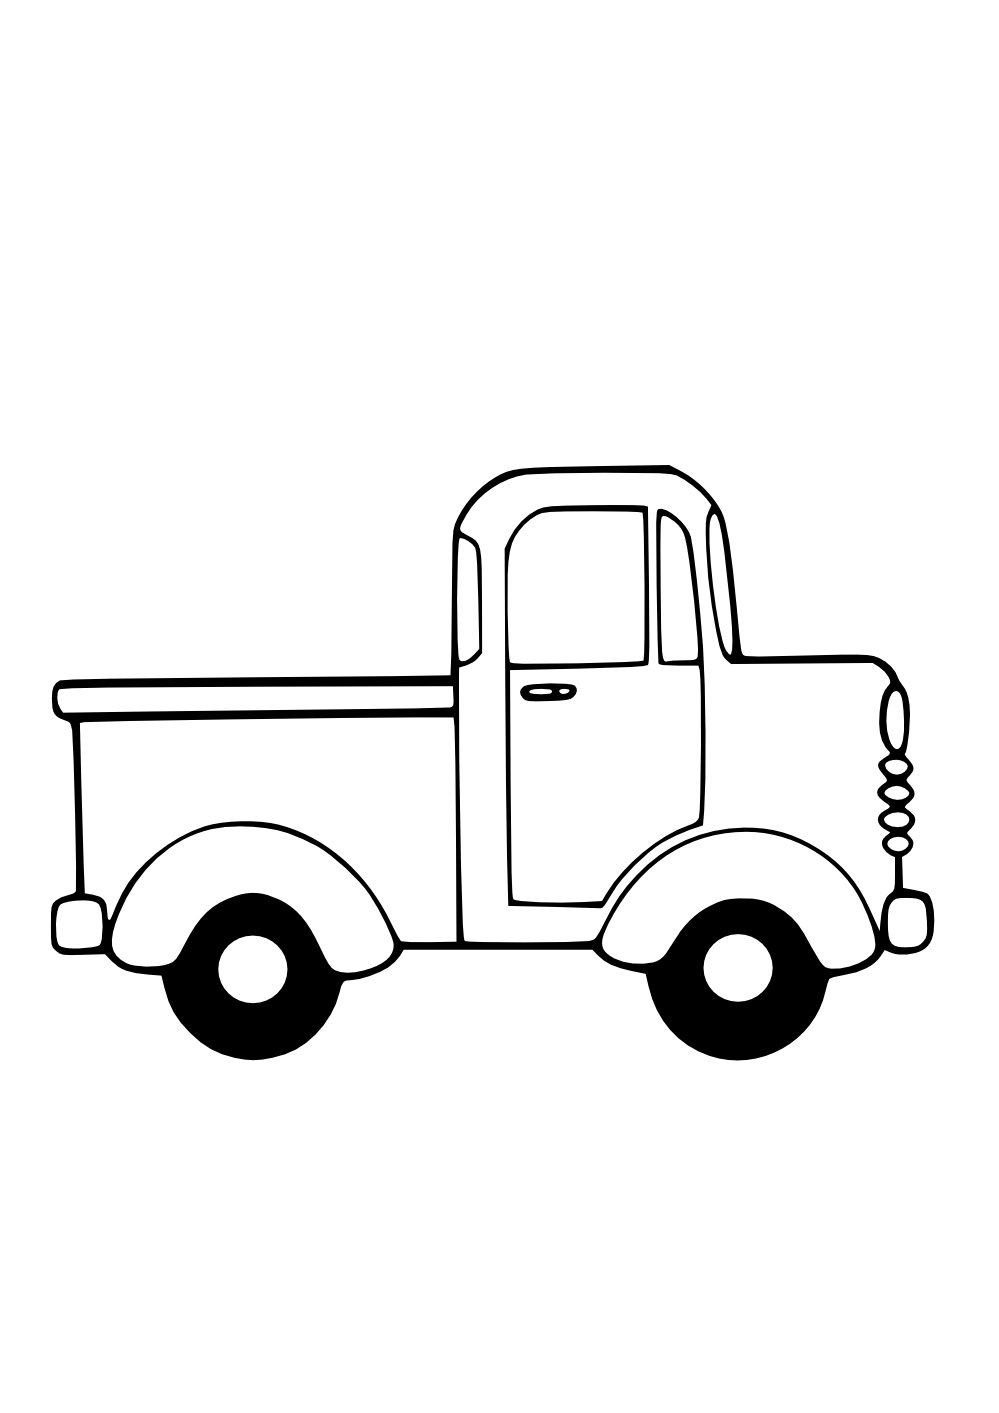 Toddler clipart black and white. Truck panda free images